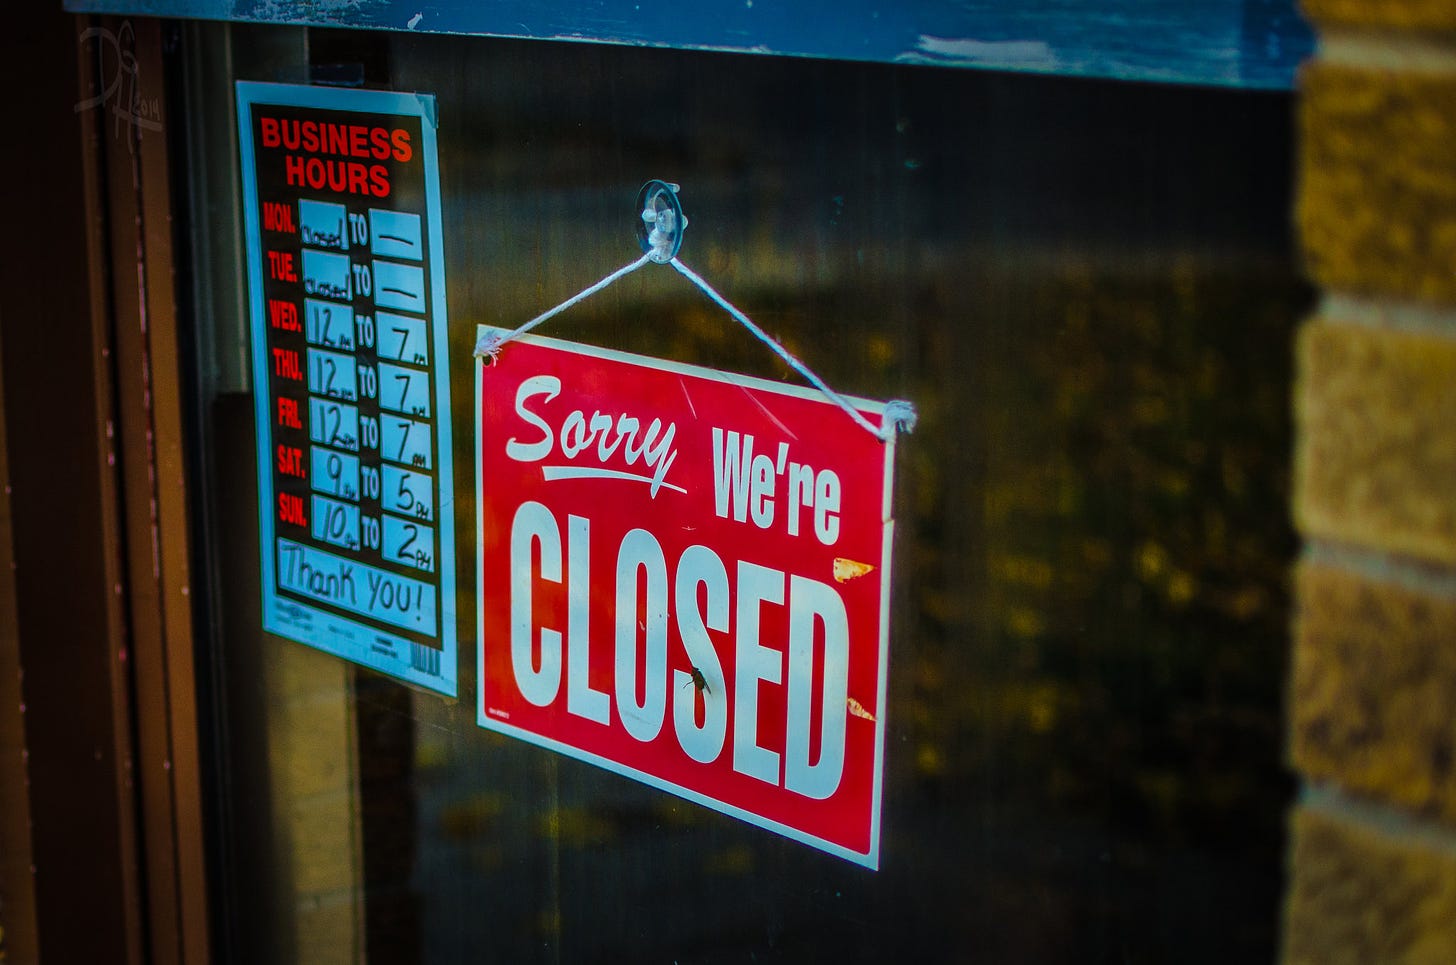 'Sorry, we're closed' sign